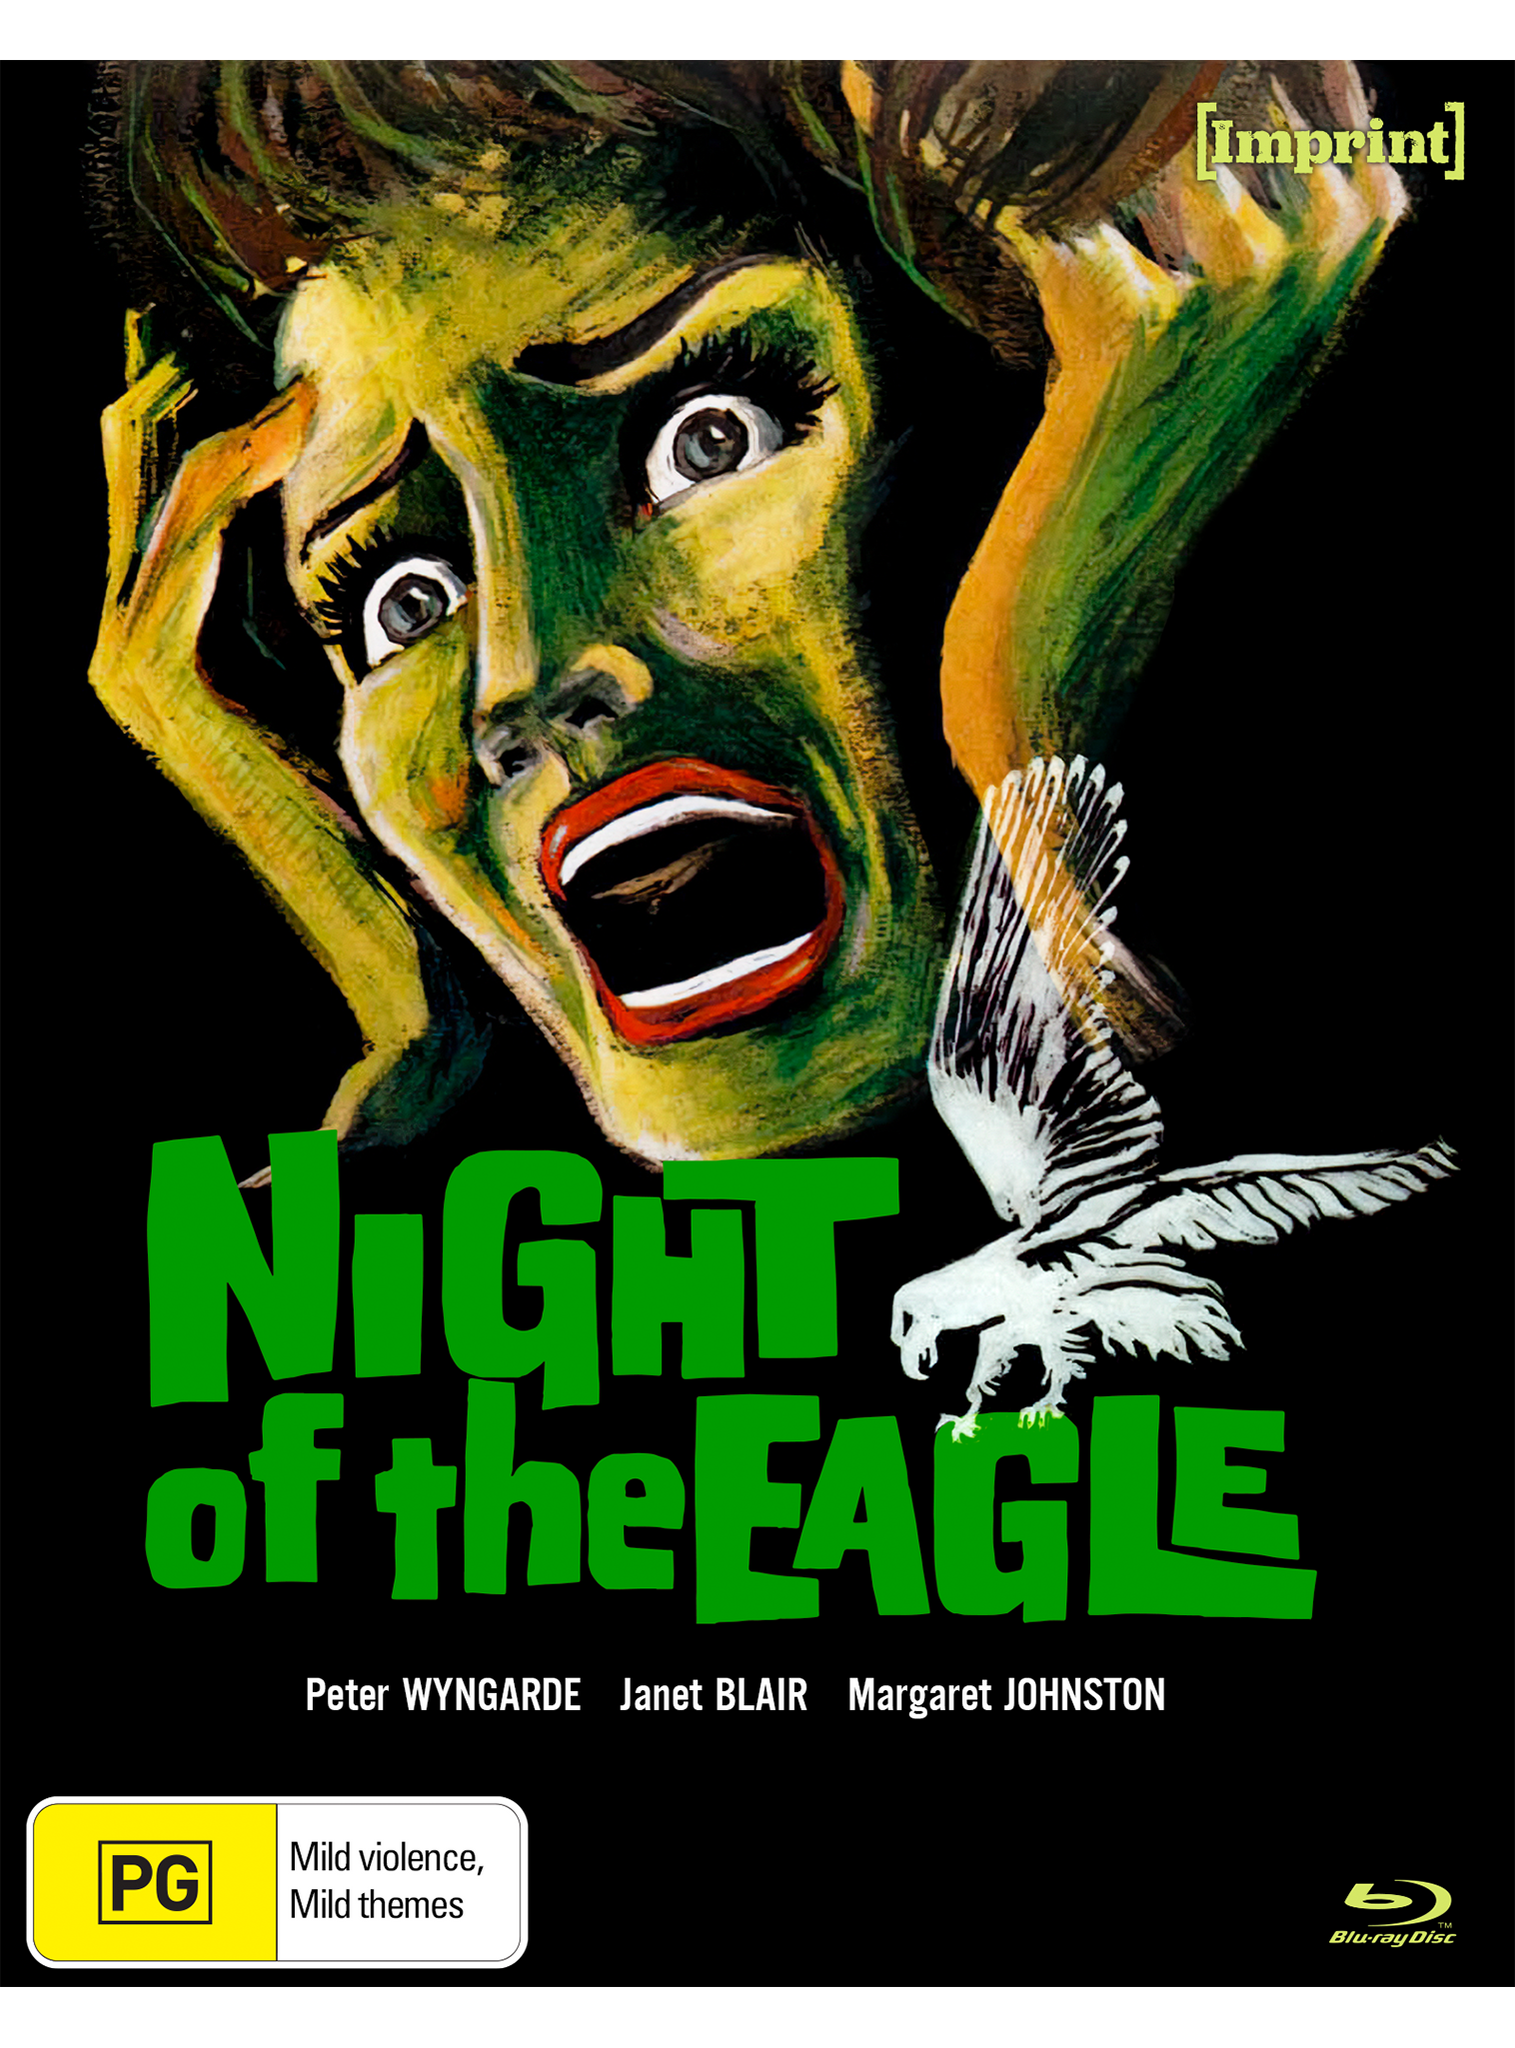 NIGHT OF THE EAGLE (IMPRINT COLLECTION #261)